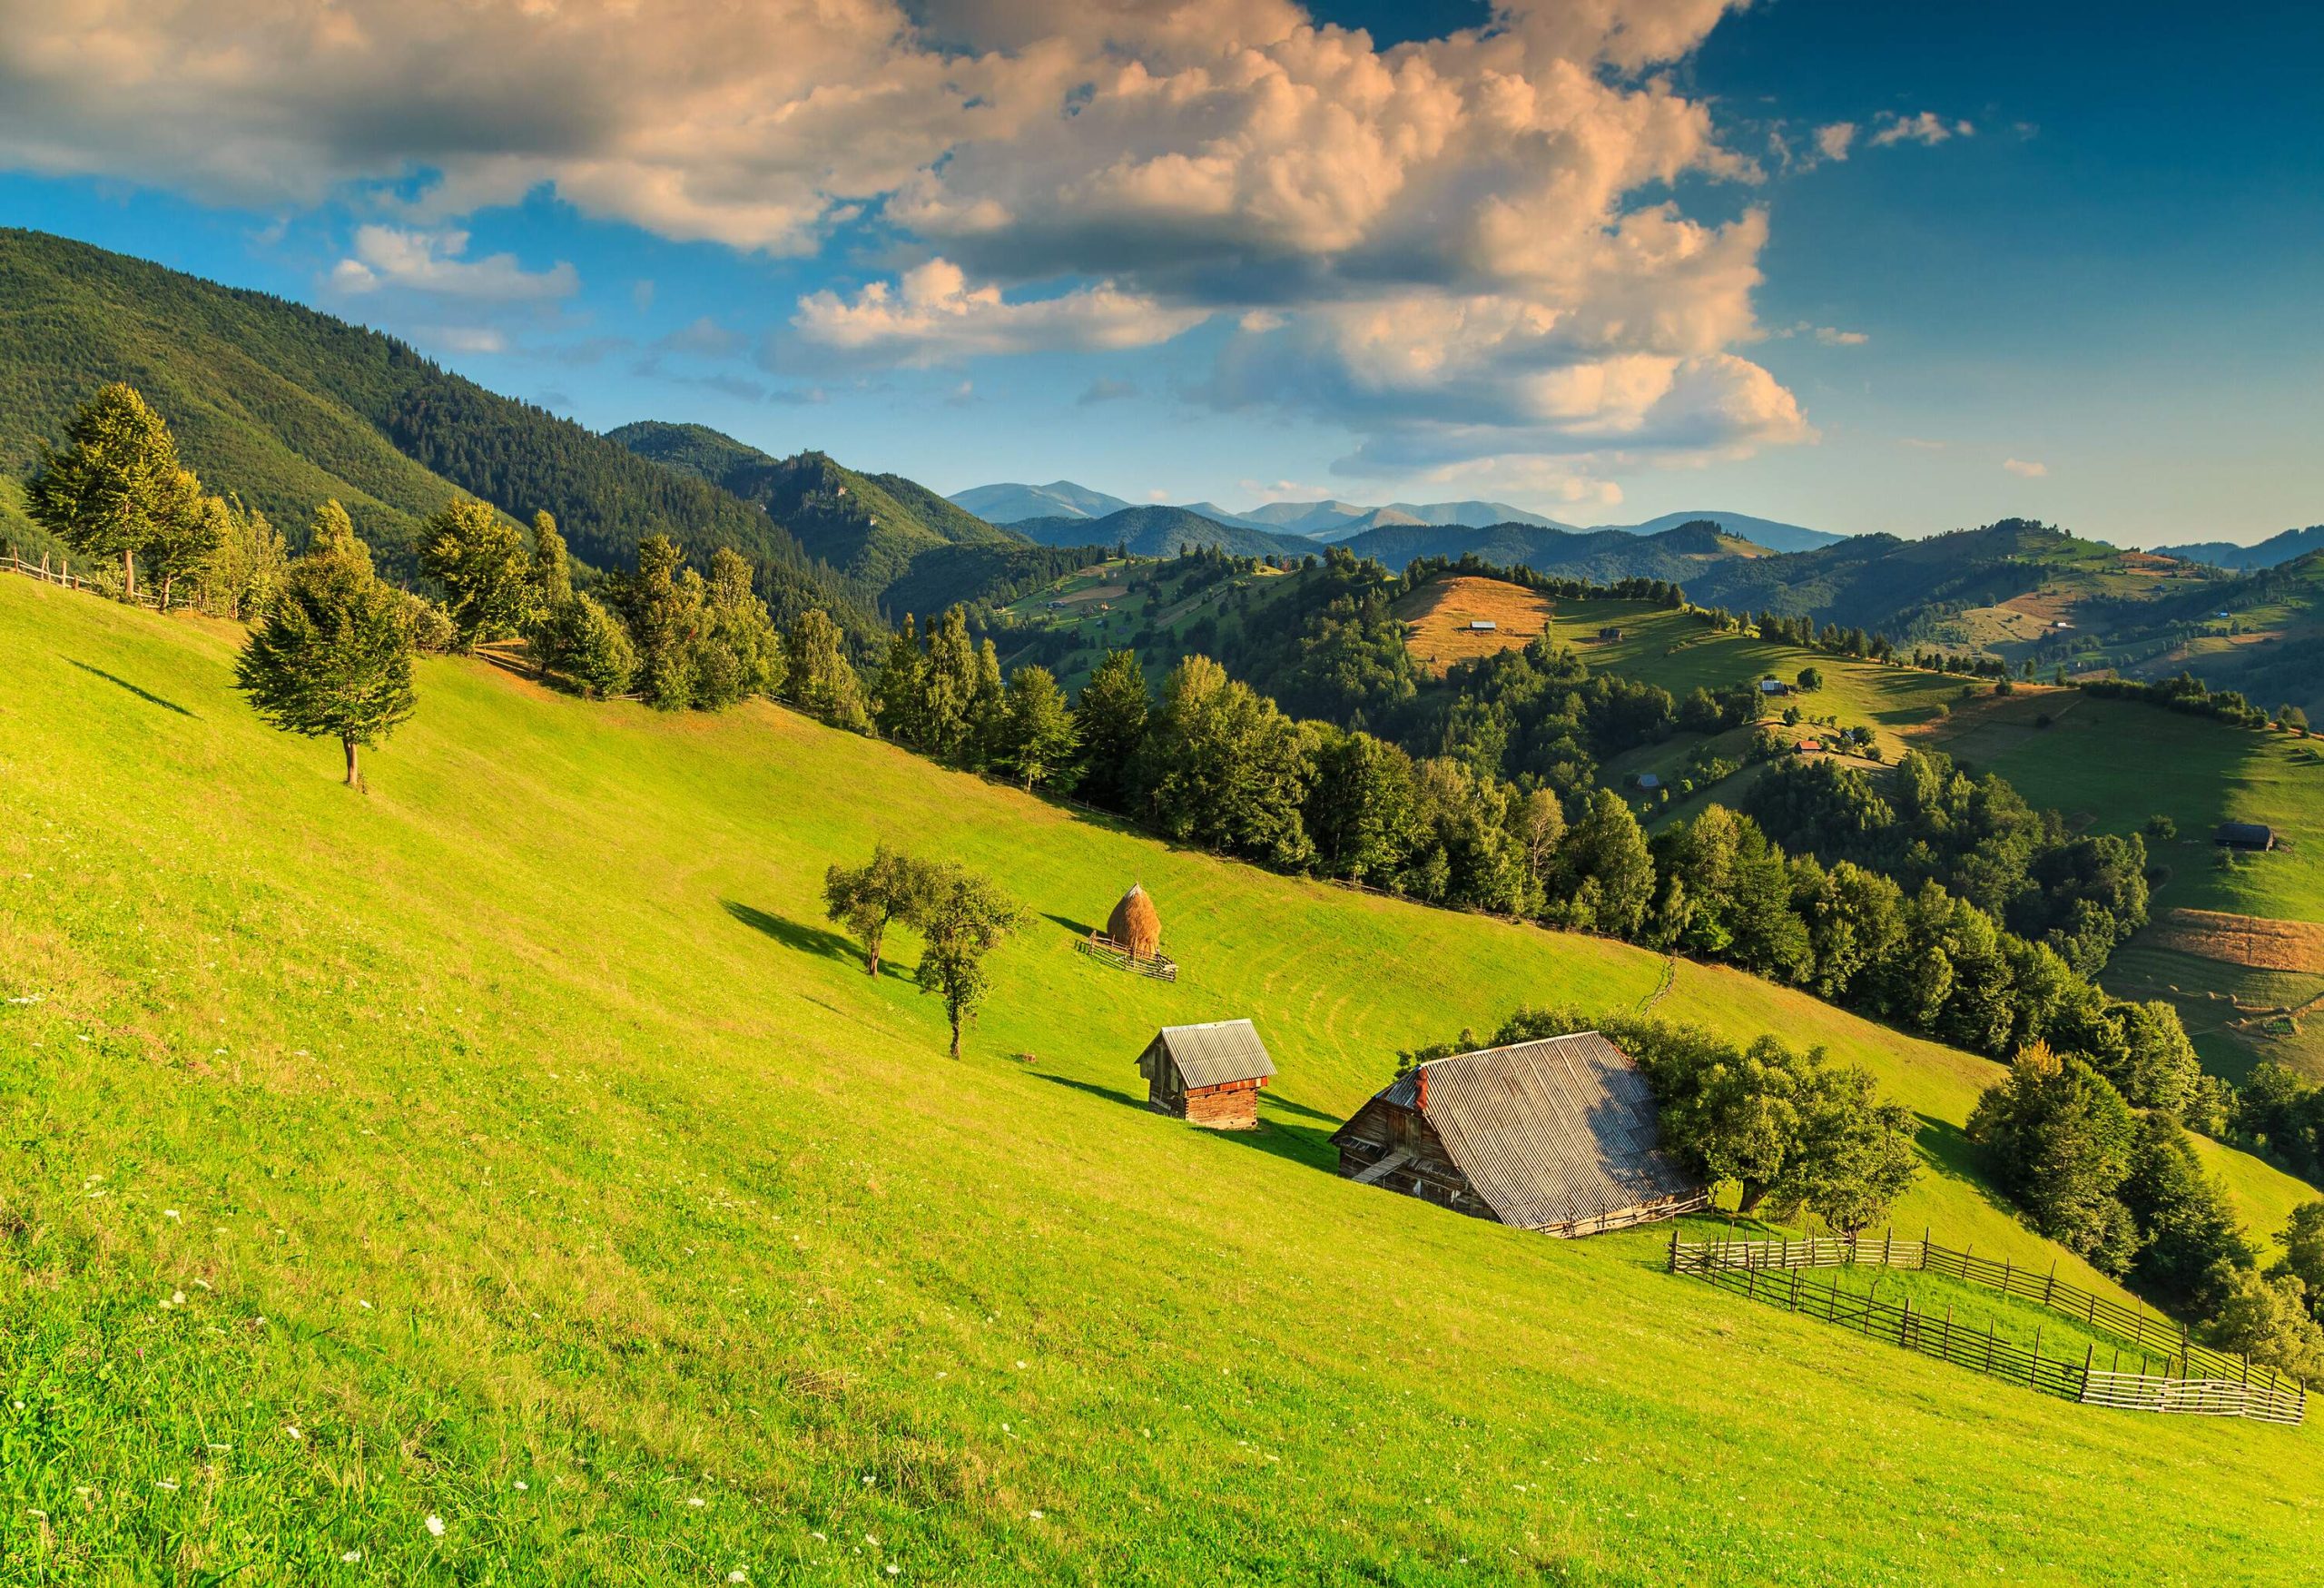 An expansive alpine landscape adorned with vibrant green fields, undulating slopes, a cluster of trees in the distance, and a breathtaking panoramic vista of the surrounding emerald-hued mountains.